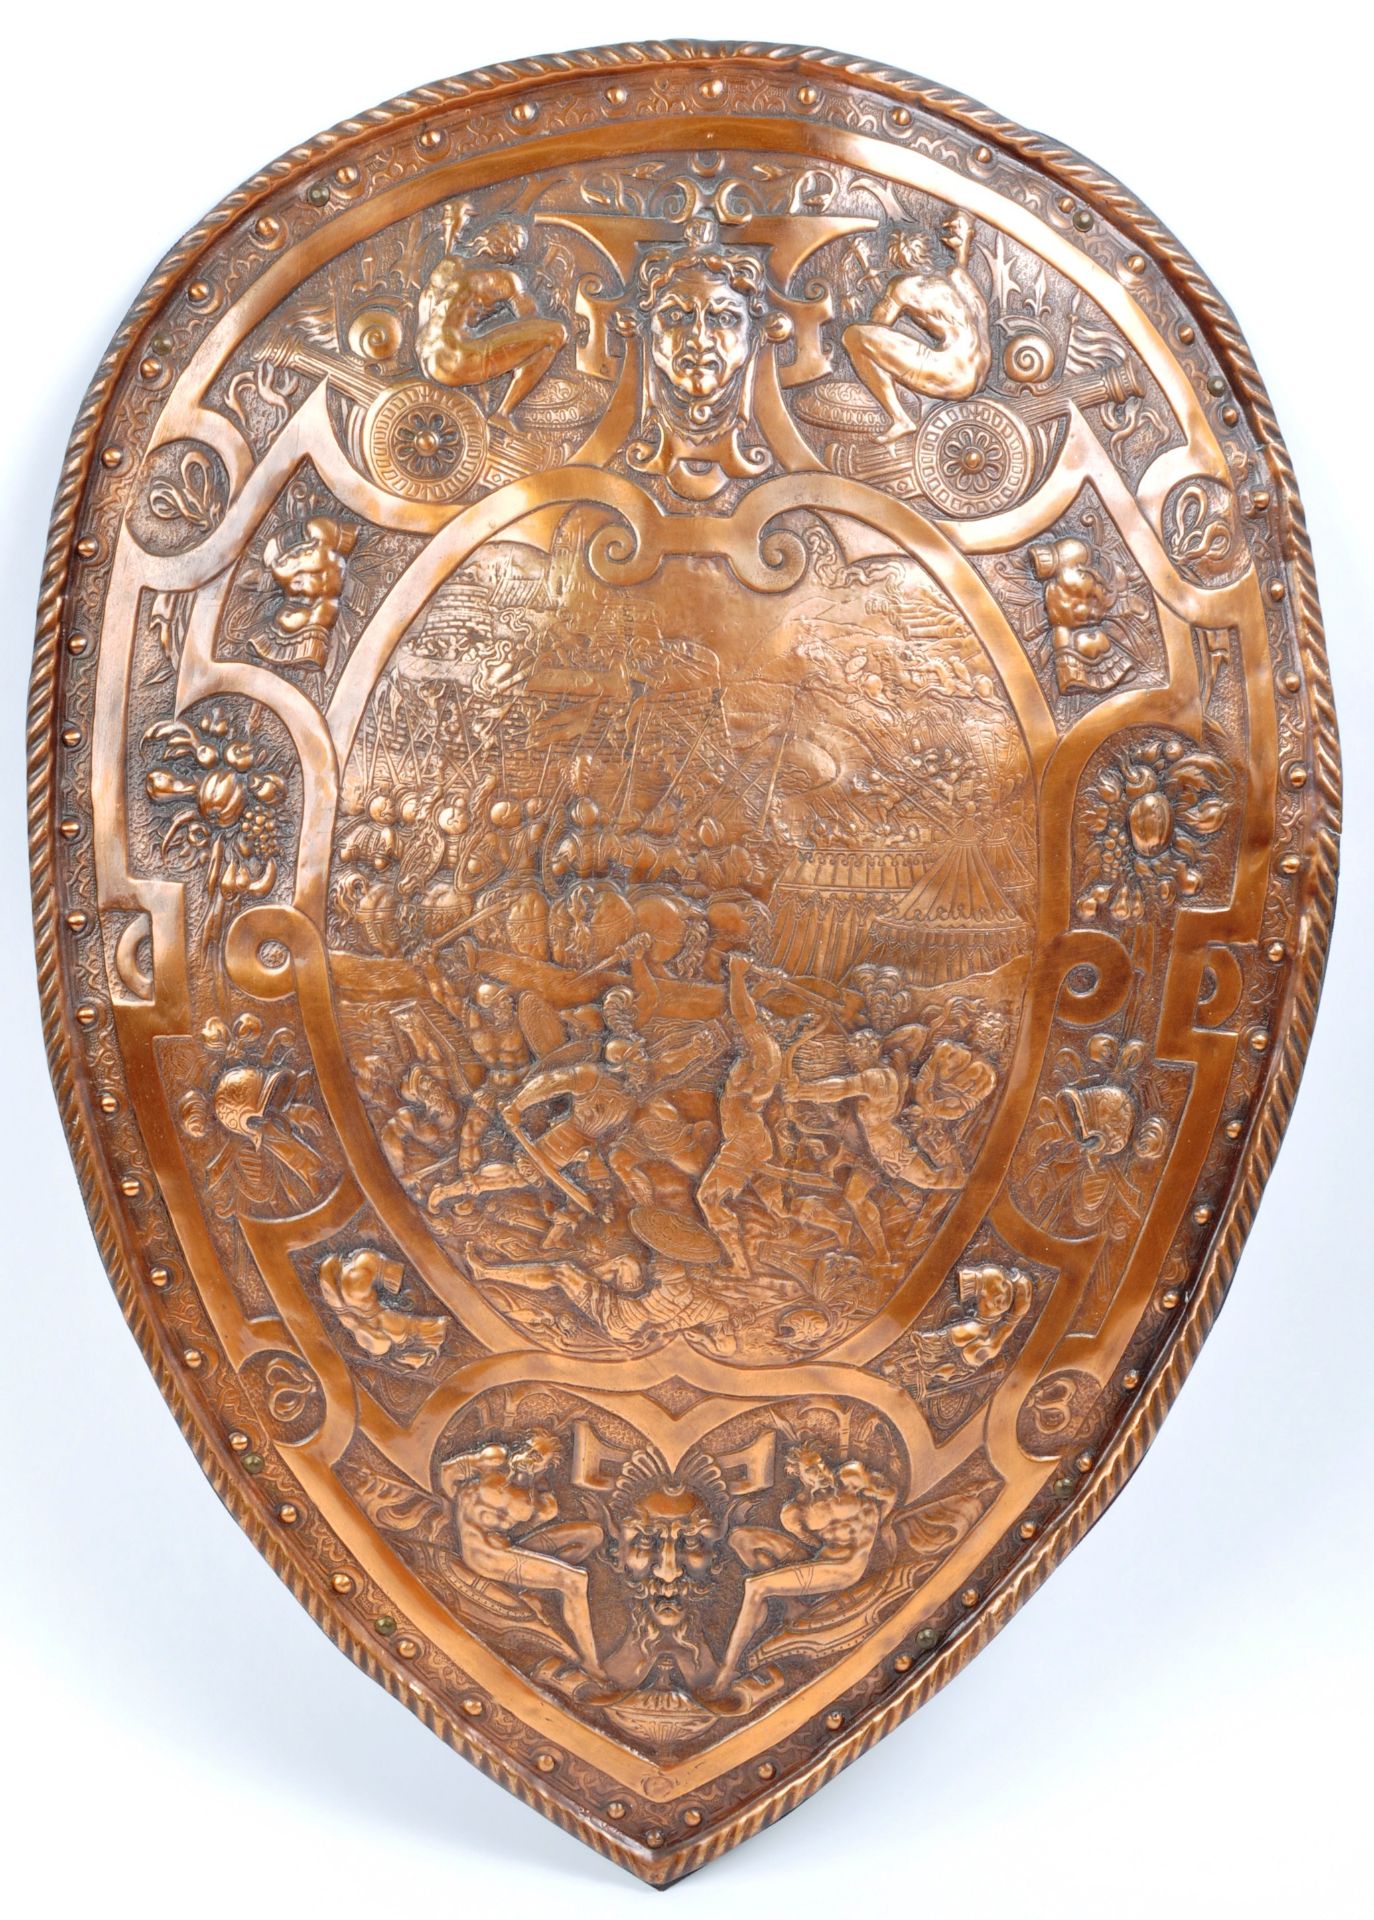 19TH CENTURY DECORATIVE COPPER SHIELD RELATING TO HENRY II